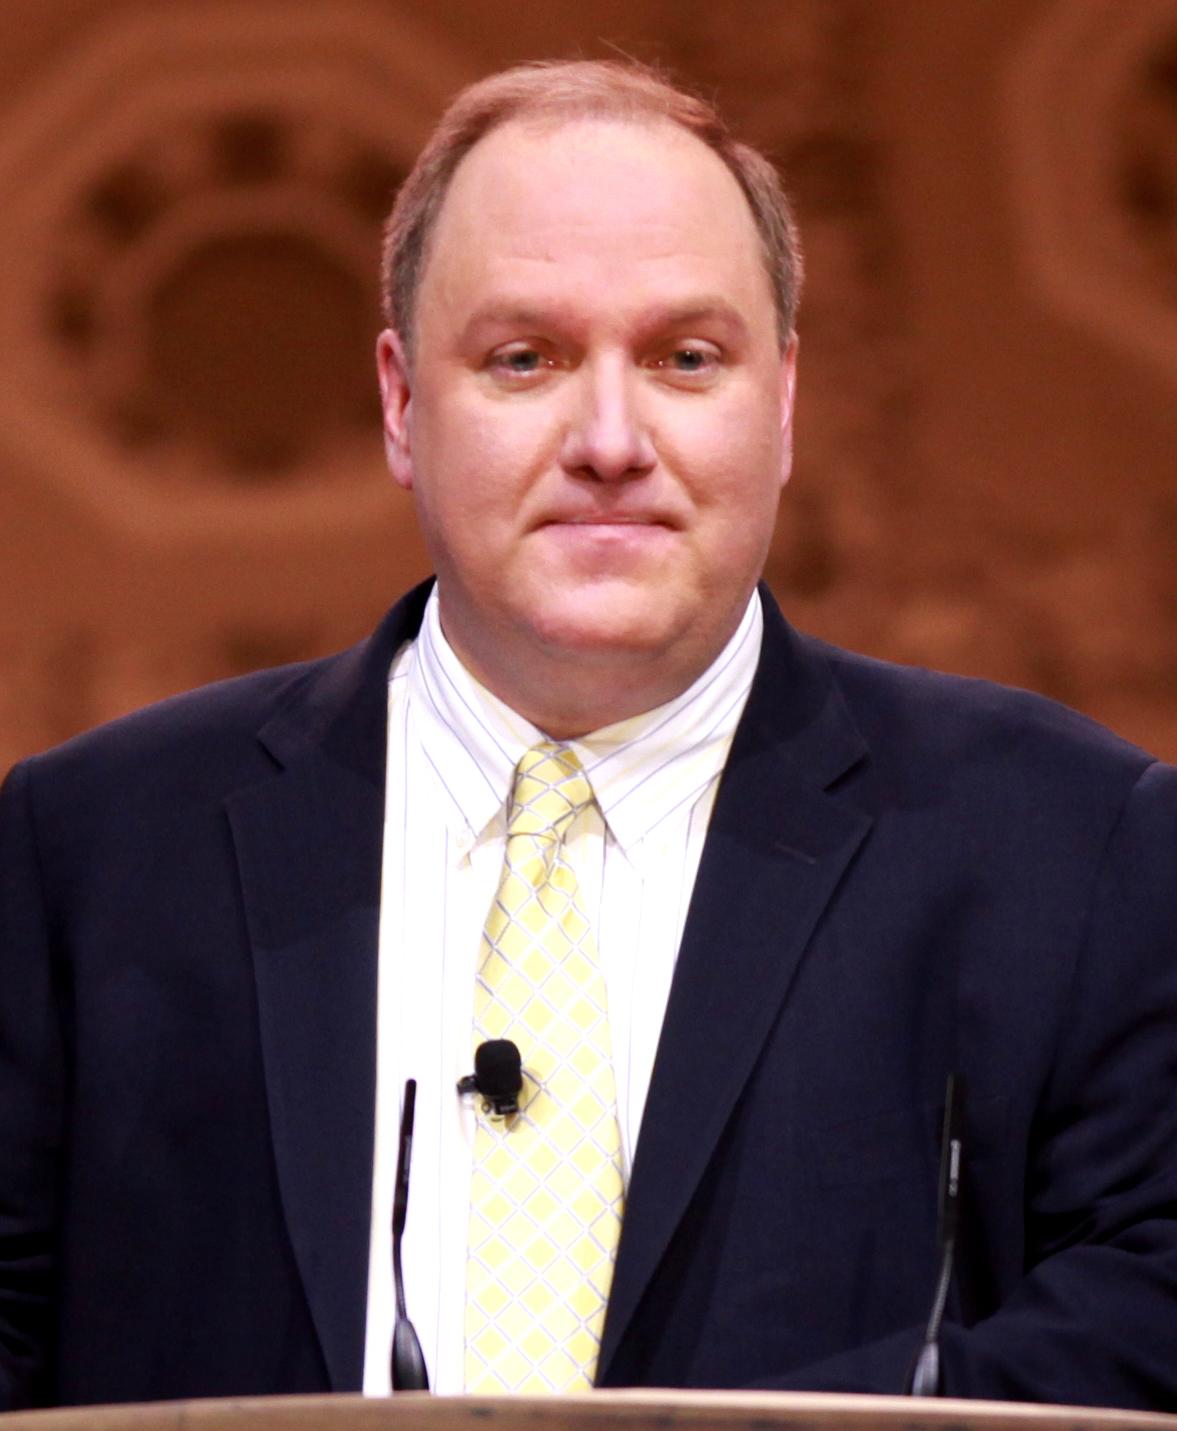 Journalist John Solomon speaks at the Conservative Political Action Conference in Washington in March 2014. (Courtesy Gage Skidmore)